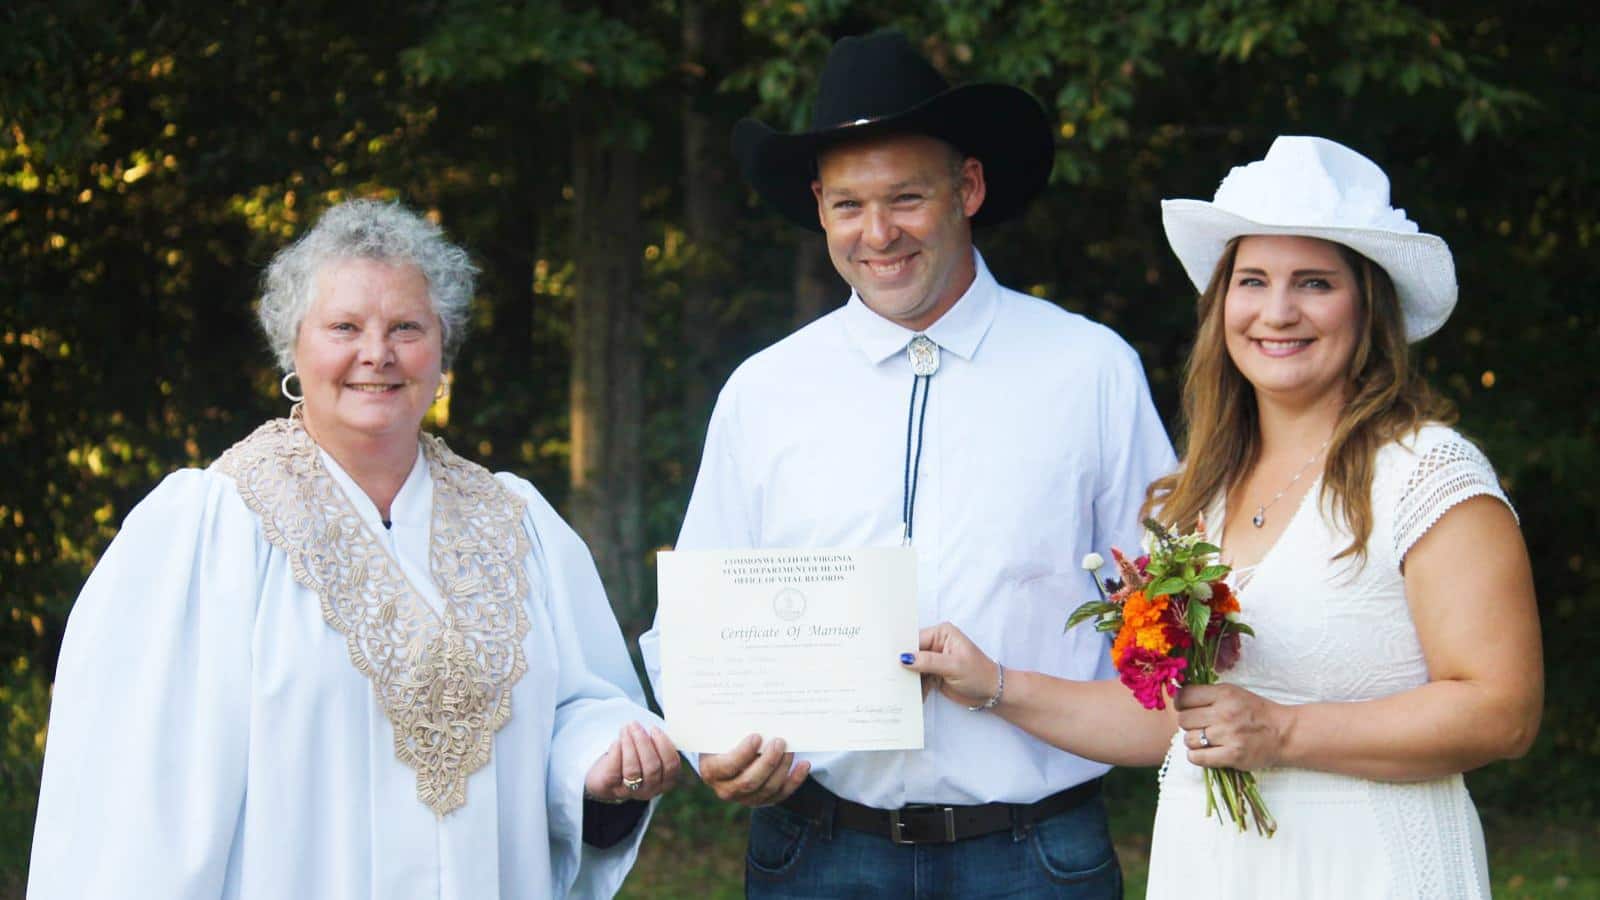 Woman in white robe handing a marriage certificate to a man in a white shirt and black hat and a woman in white hat and white dress